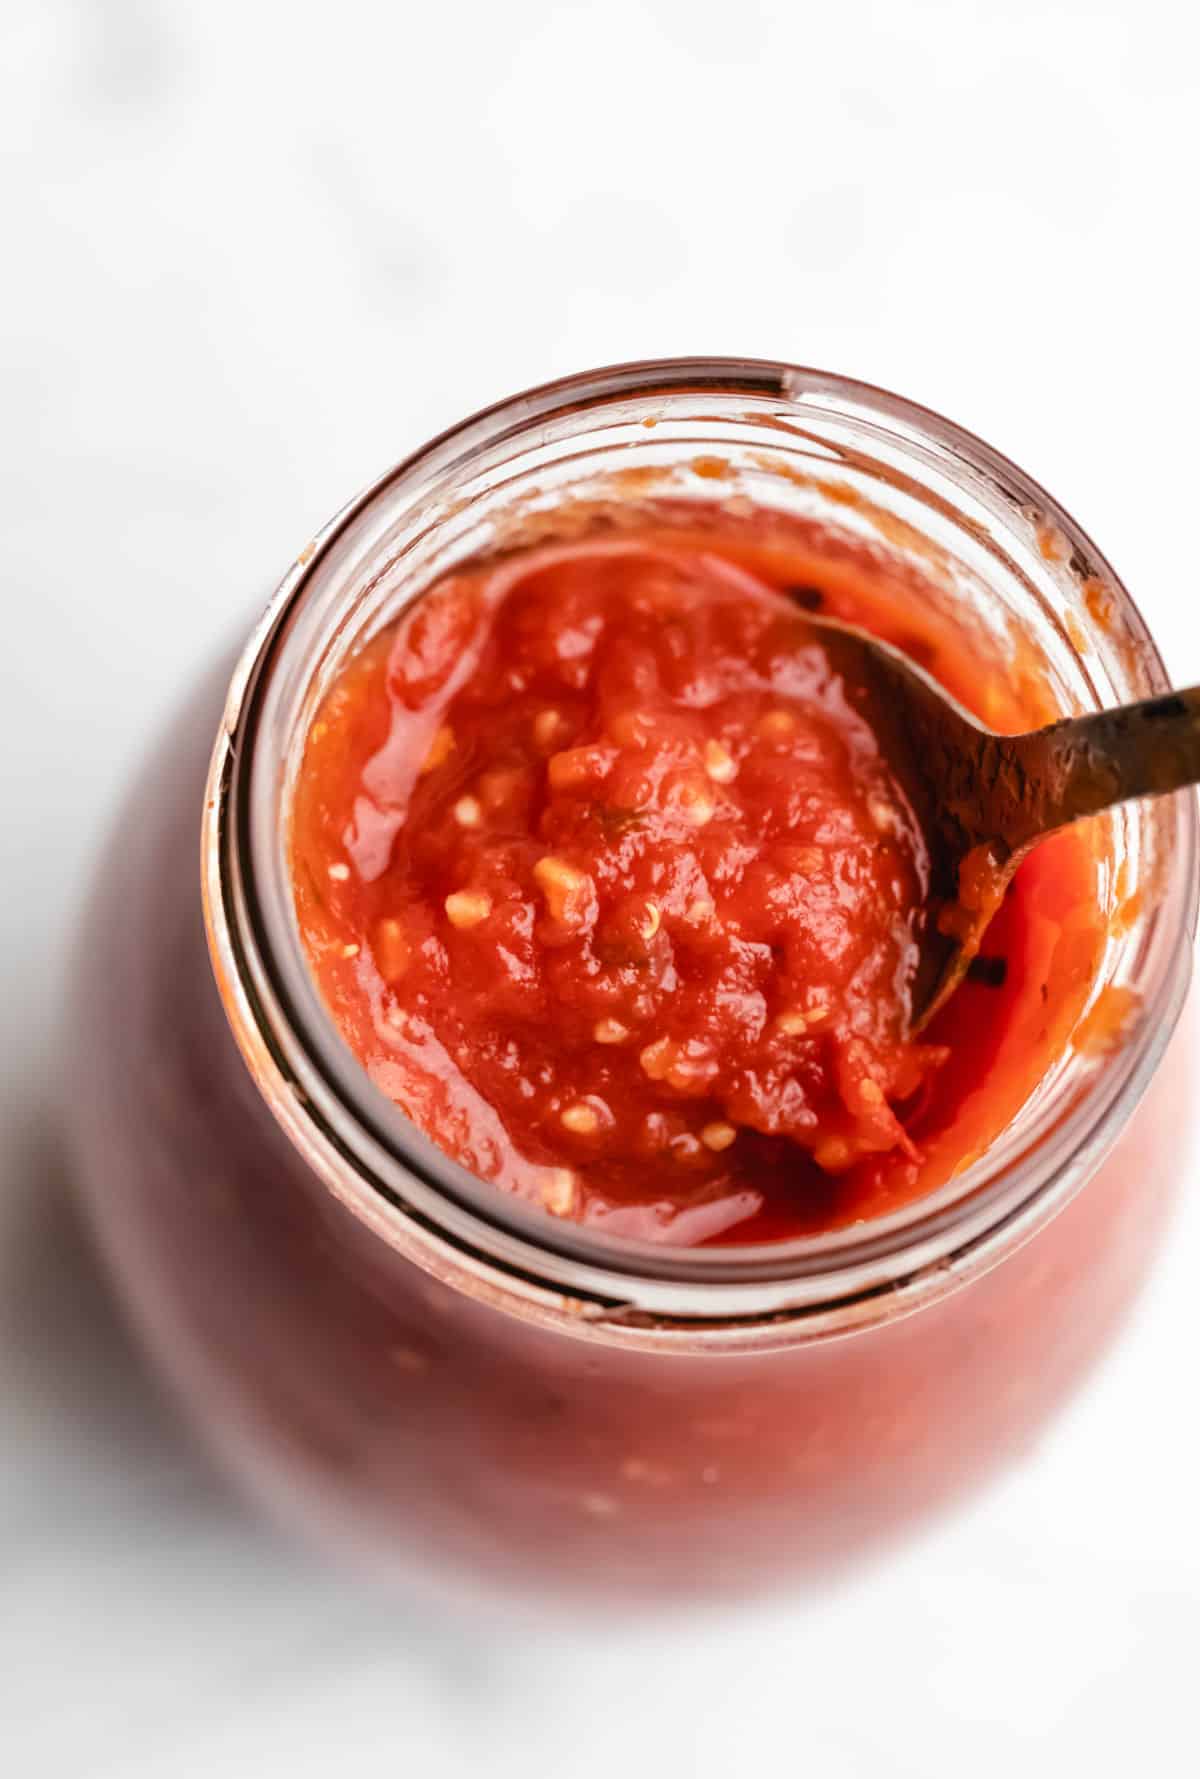 A spoon scooping pizza sauce from a glass jar. 